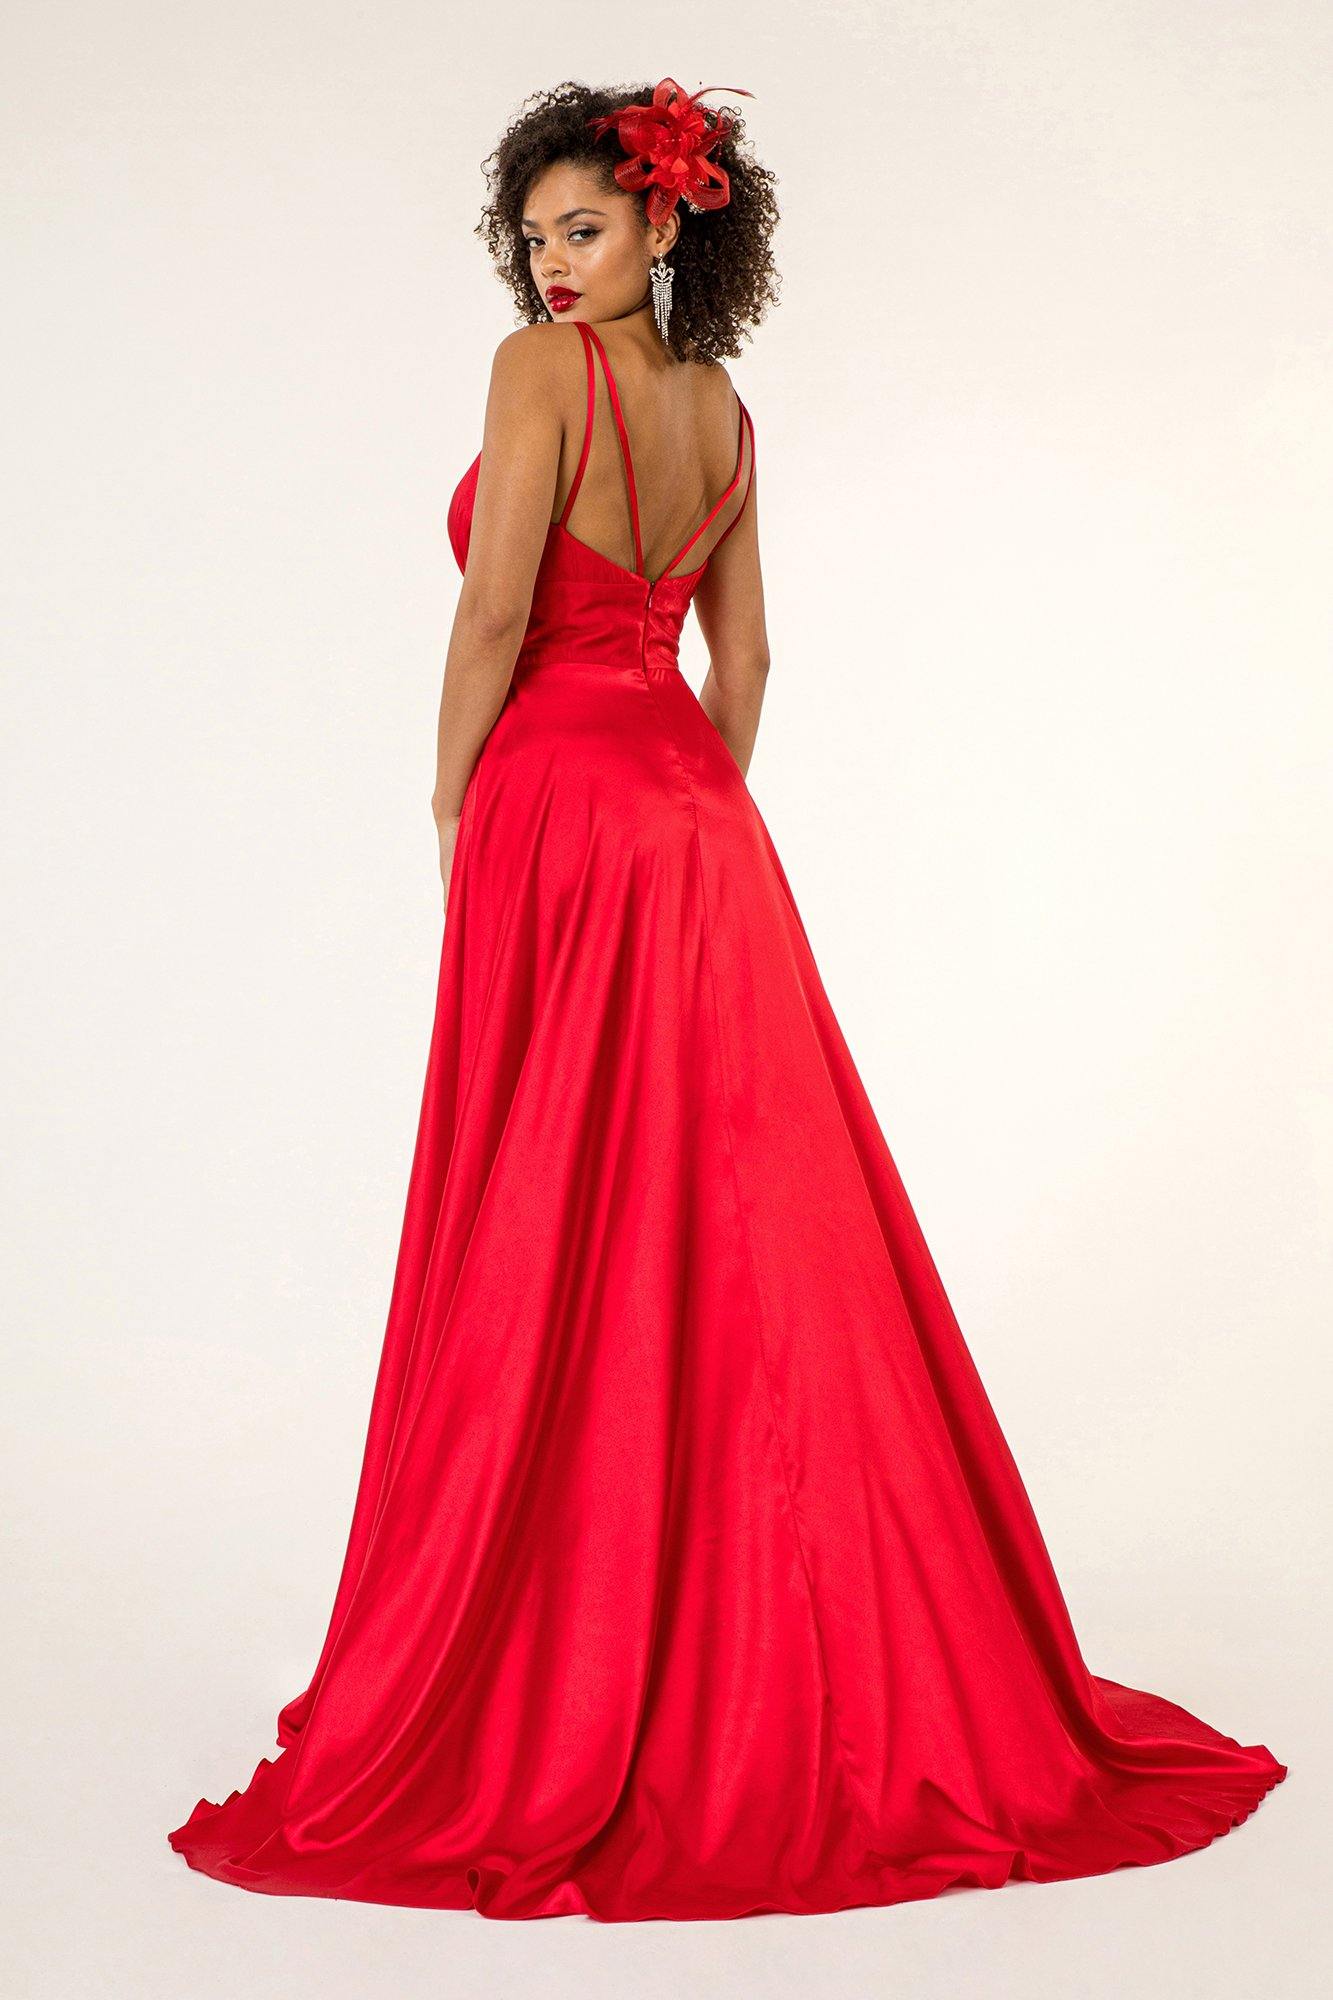 Sleeveless Red Long Prom Dress Sale - The Dress Outlet